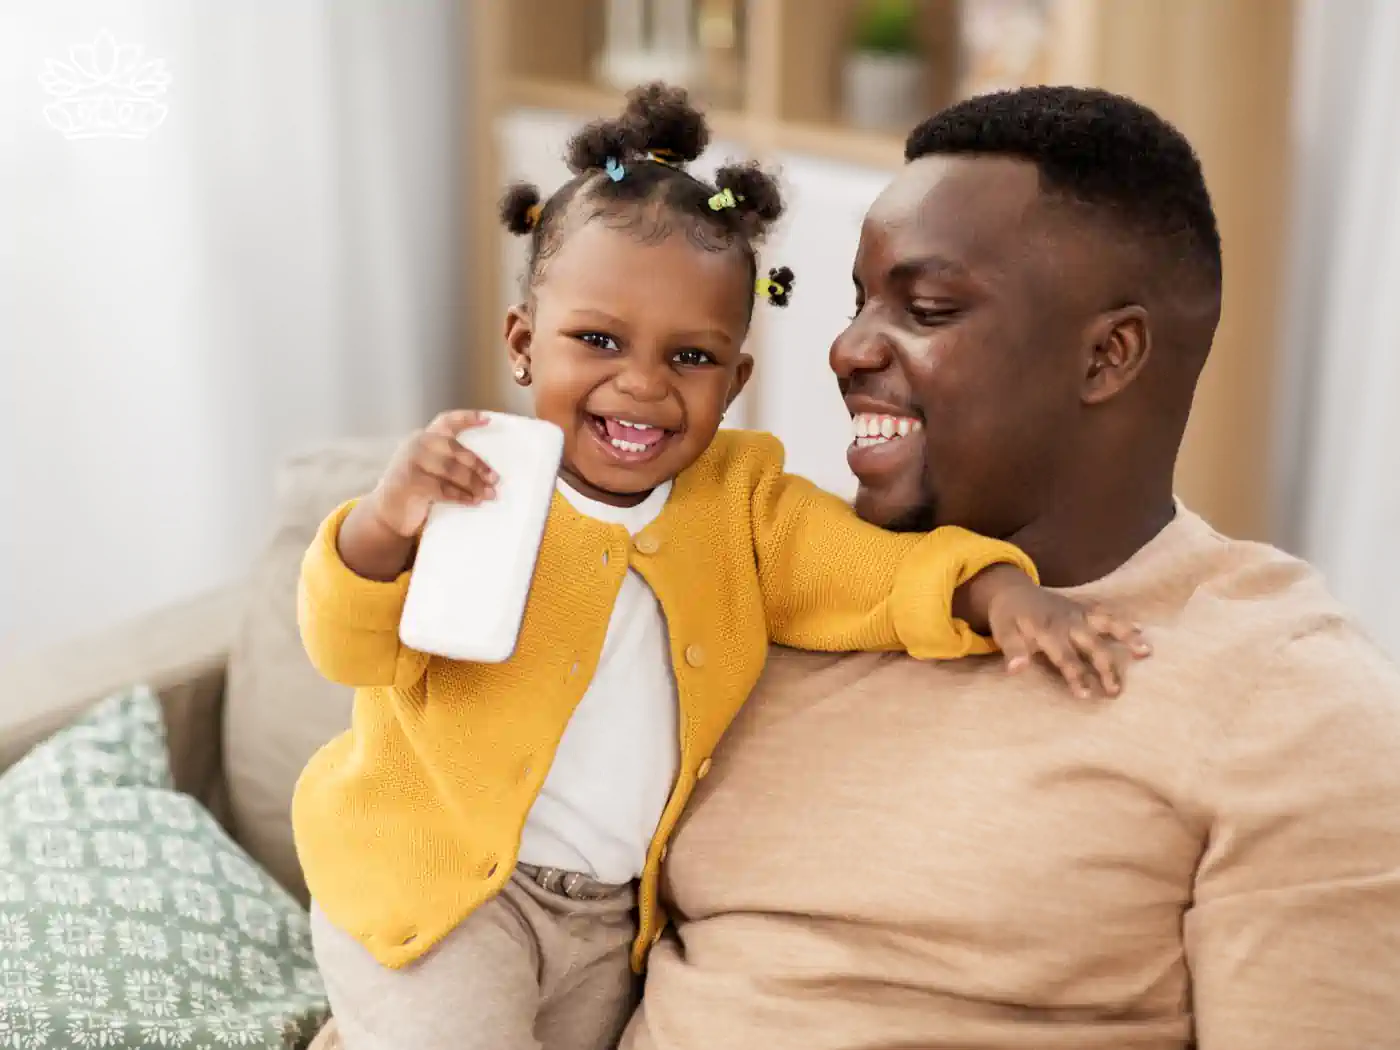 Smiling father holding his happy child who is holding a smartphone, both wearing warm-toned sweaters. Fabulous Flowers and Gifts.